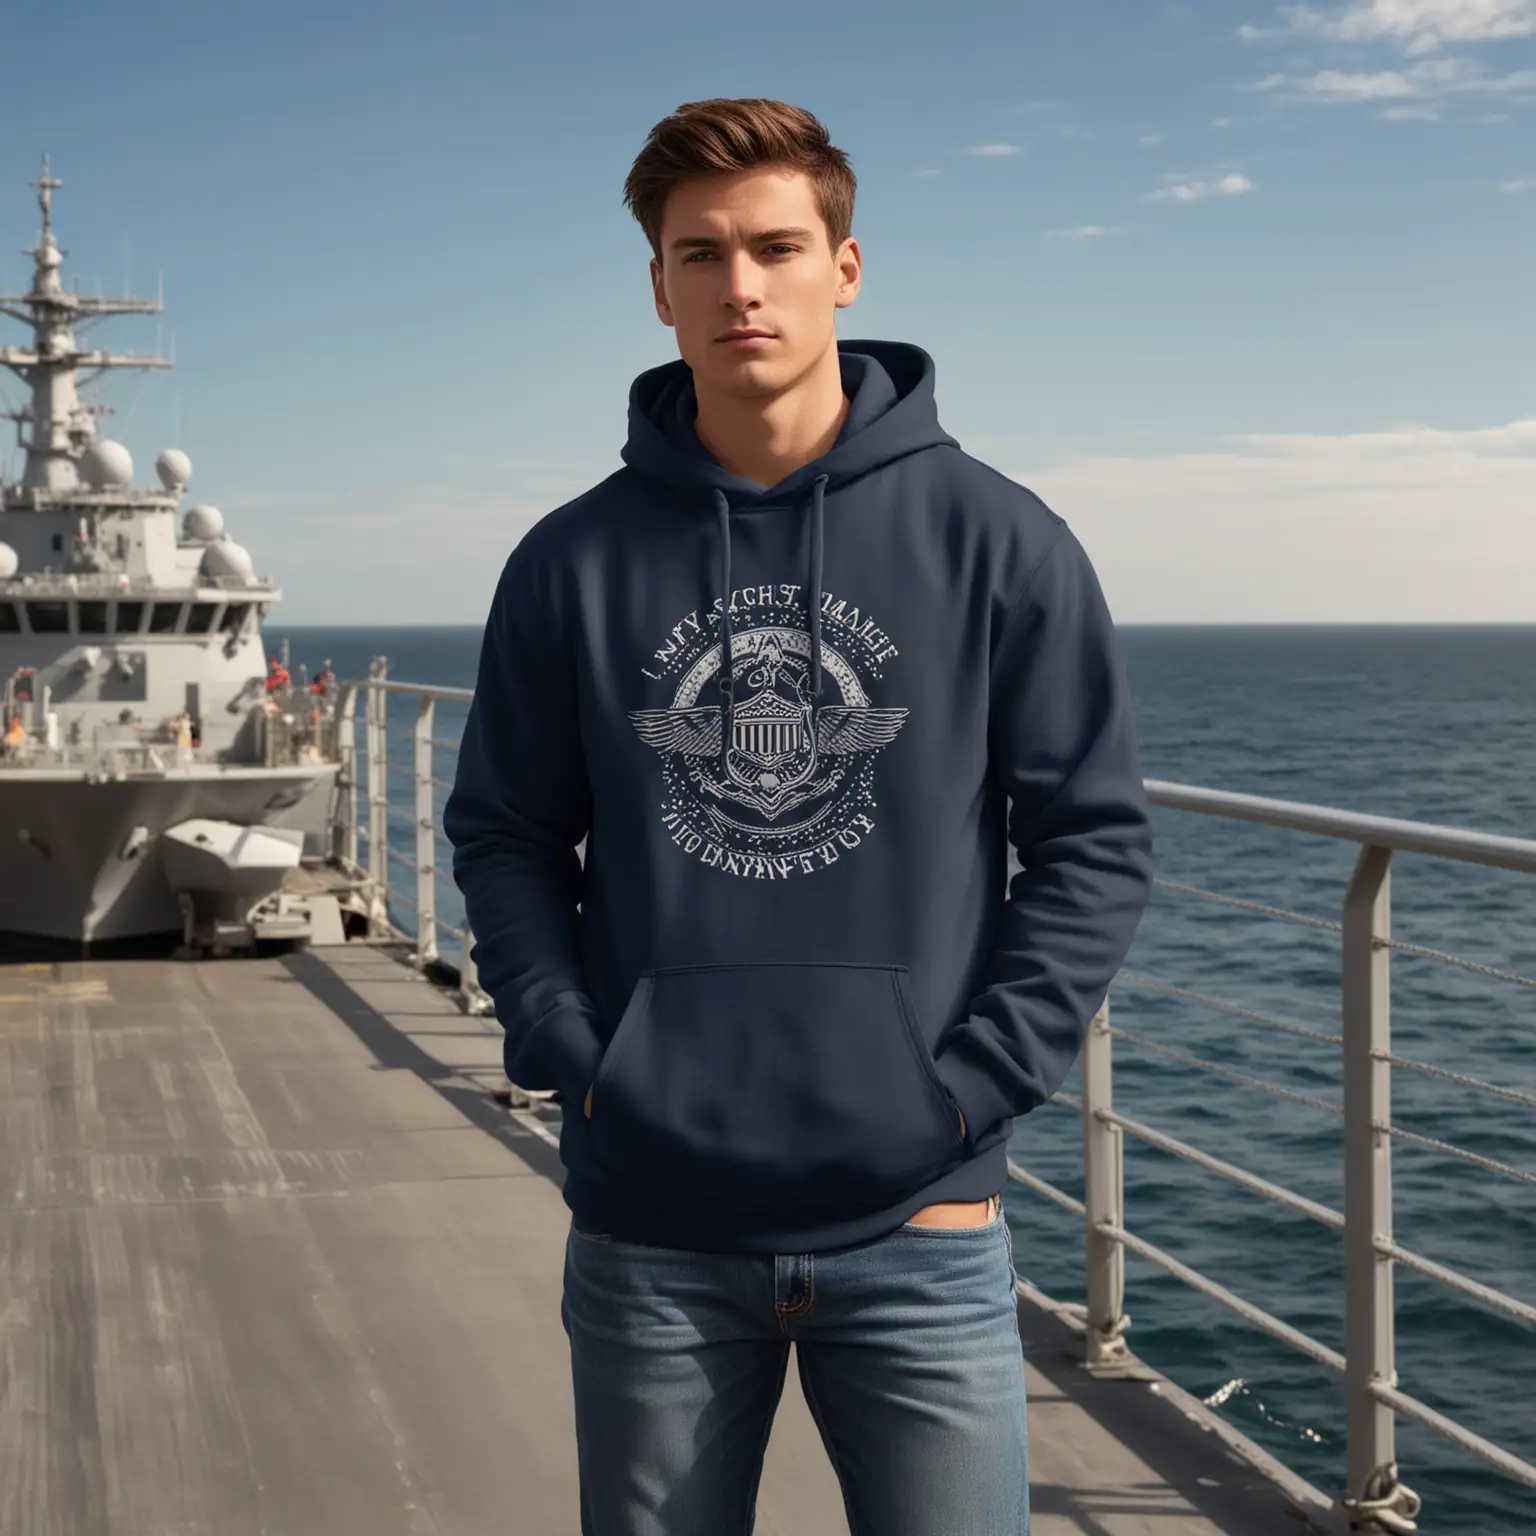 Maverick Inspired Navy Hoodie Mockup on Aircraft Carrier Deck